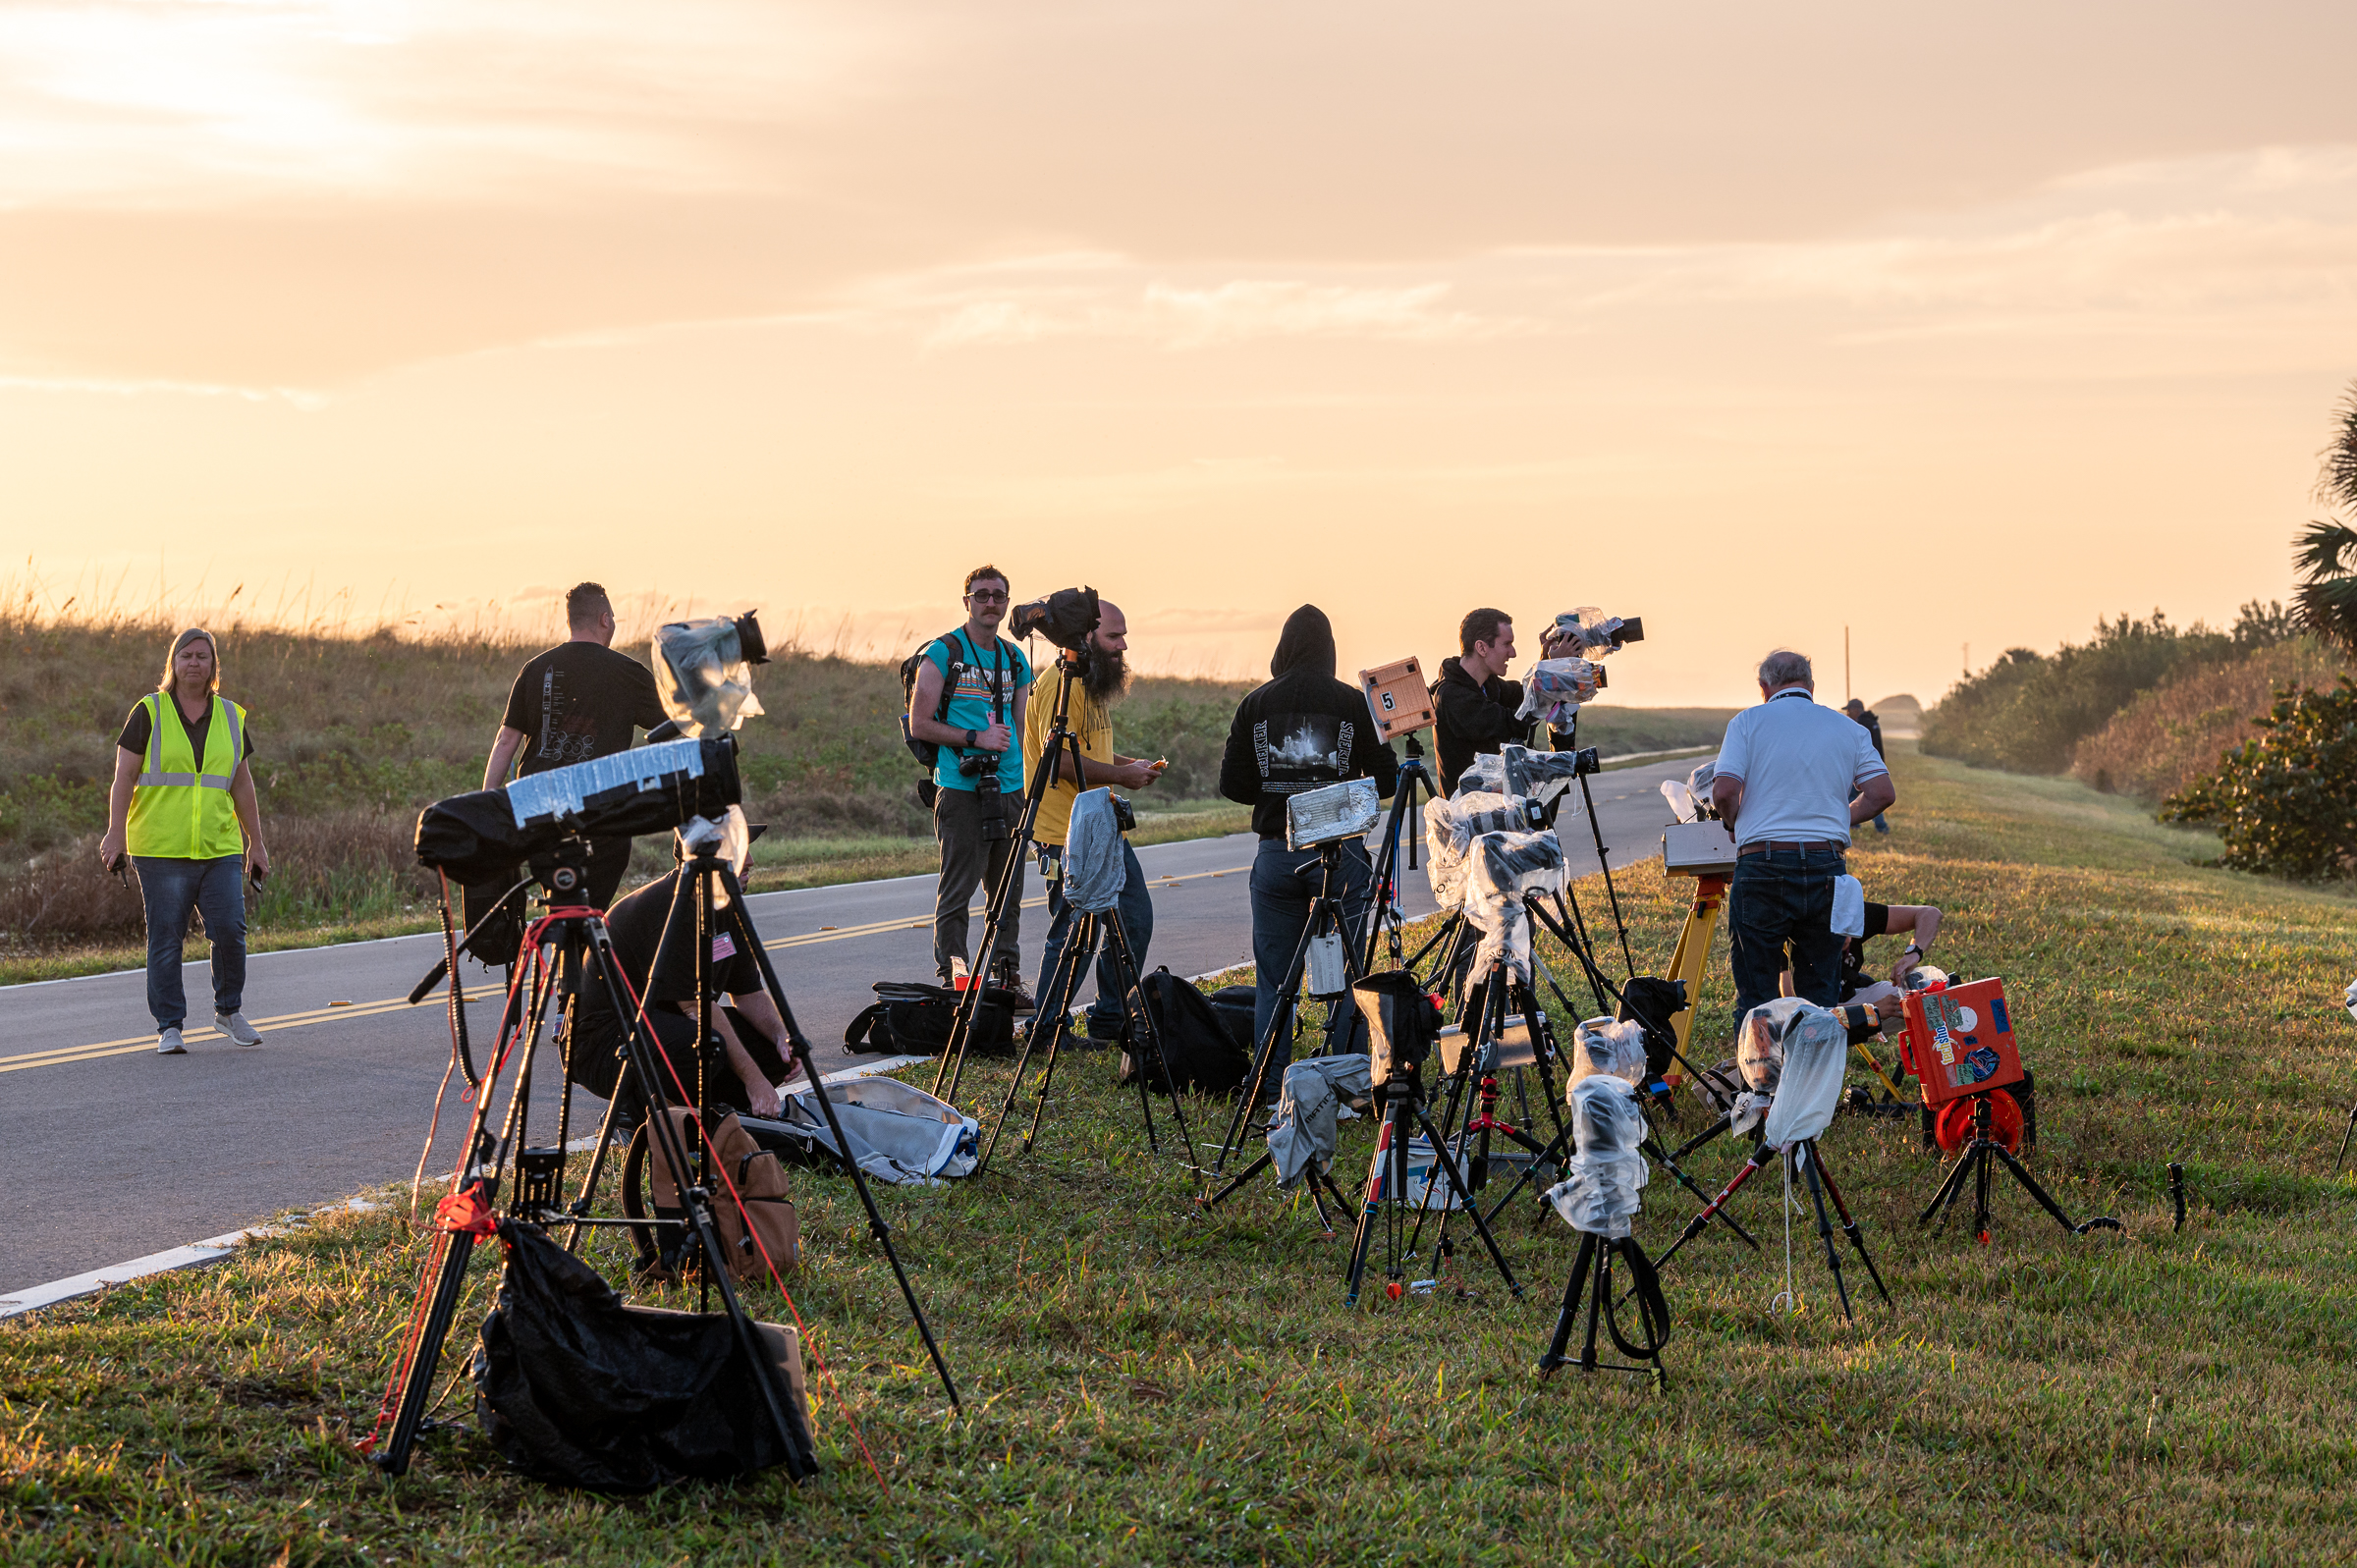 Members of the digital media crowd tend to cameras on the morning of L-1. One final check before launch.